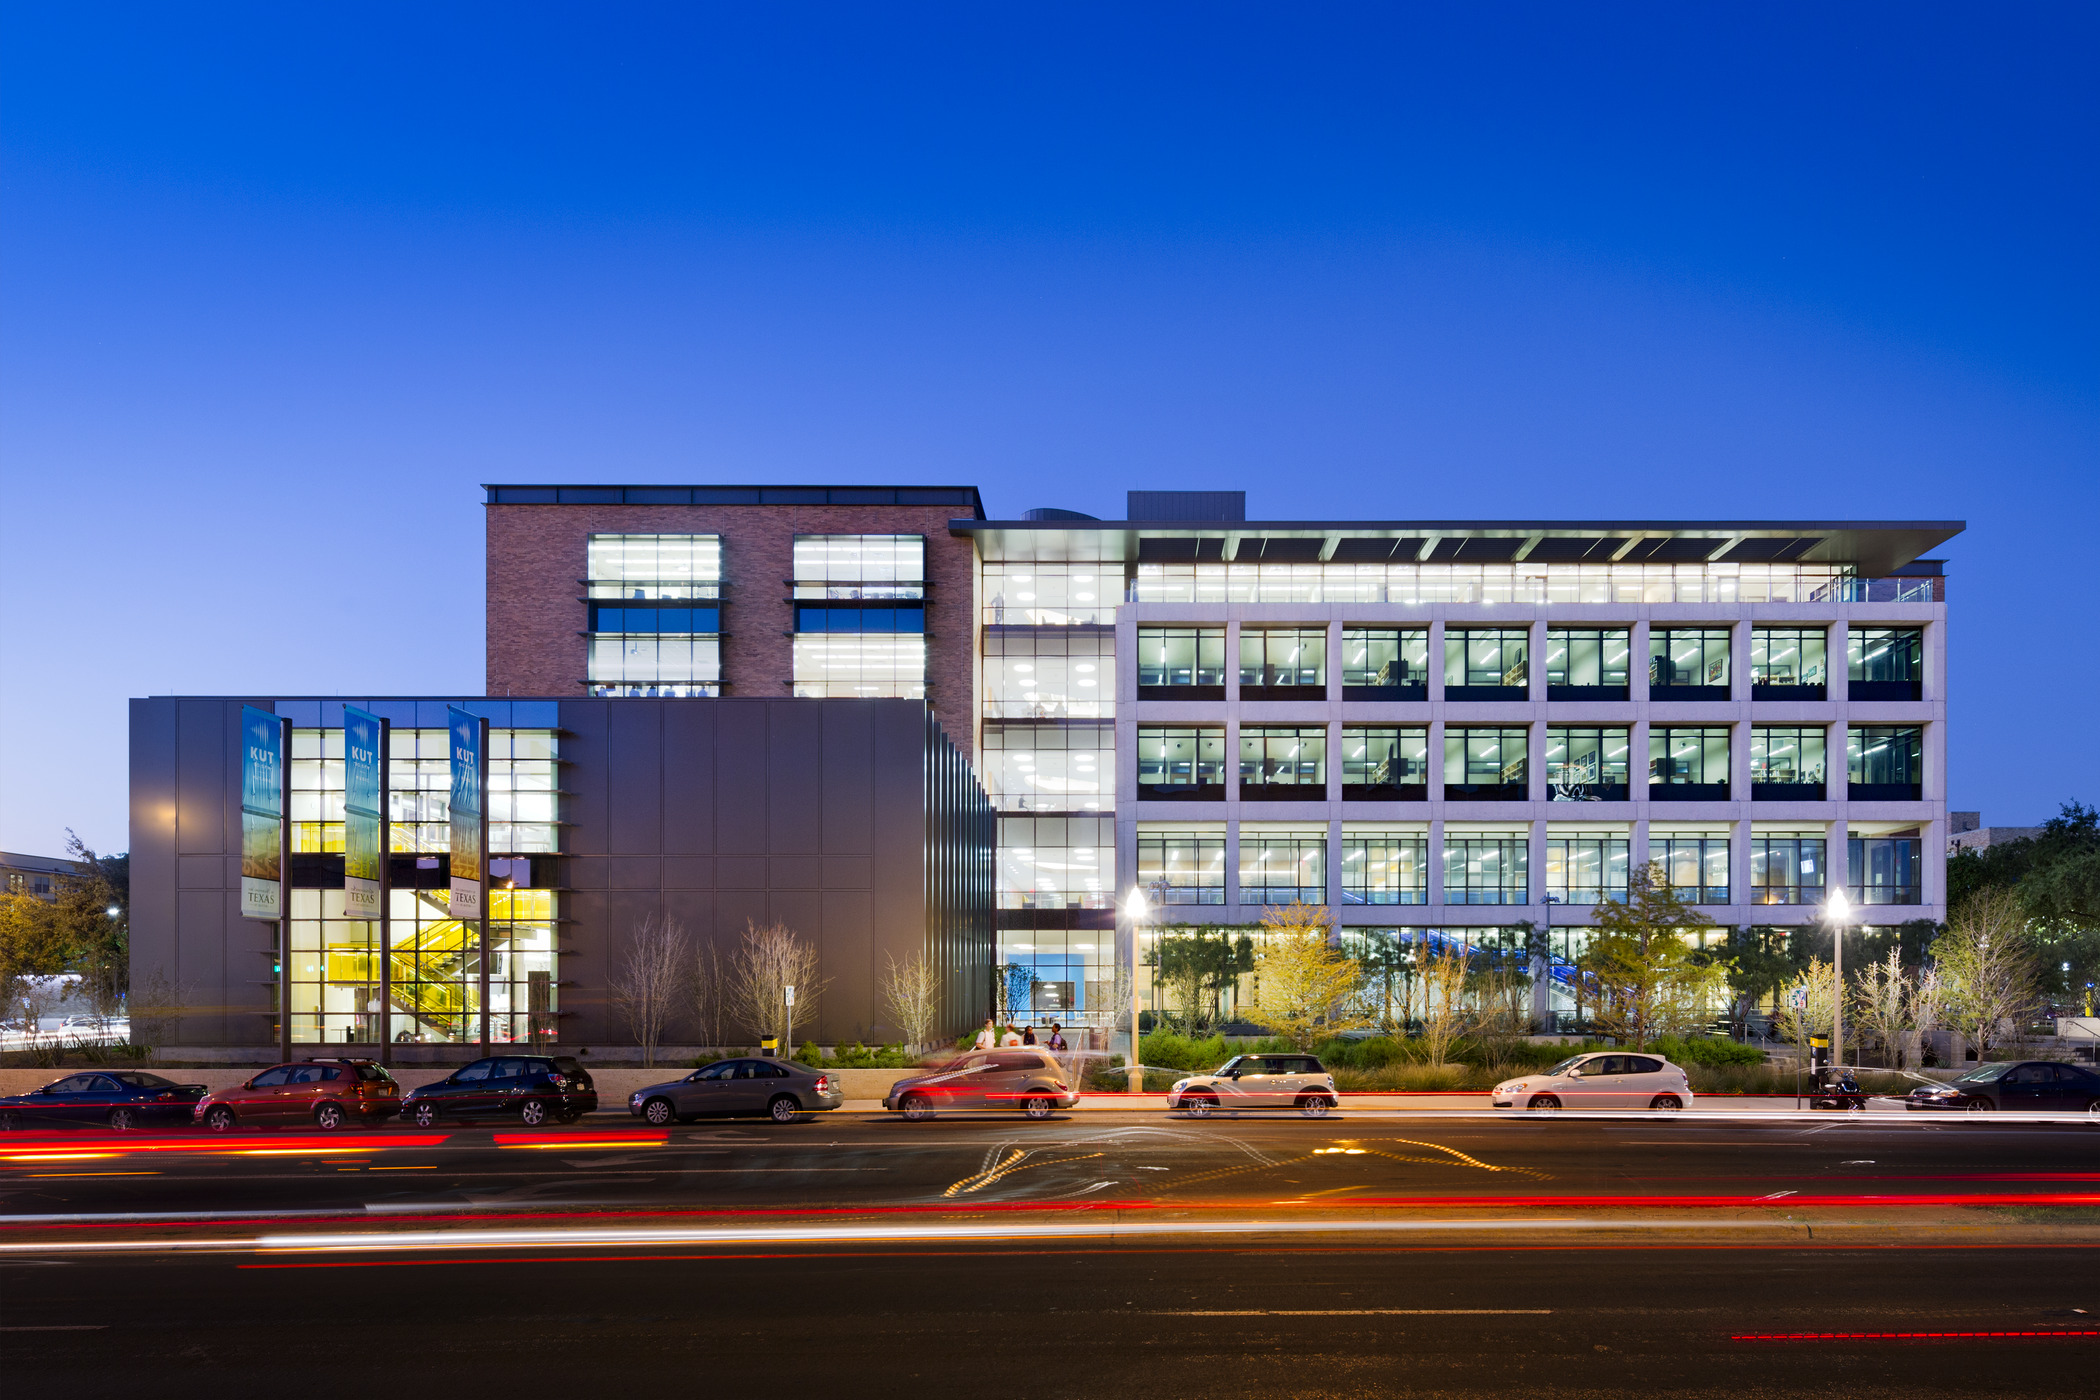 Image of the G.B. Dealey Center for New Media at night